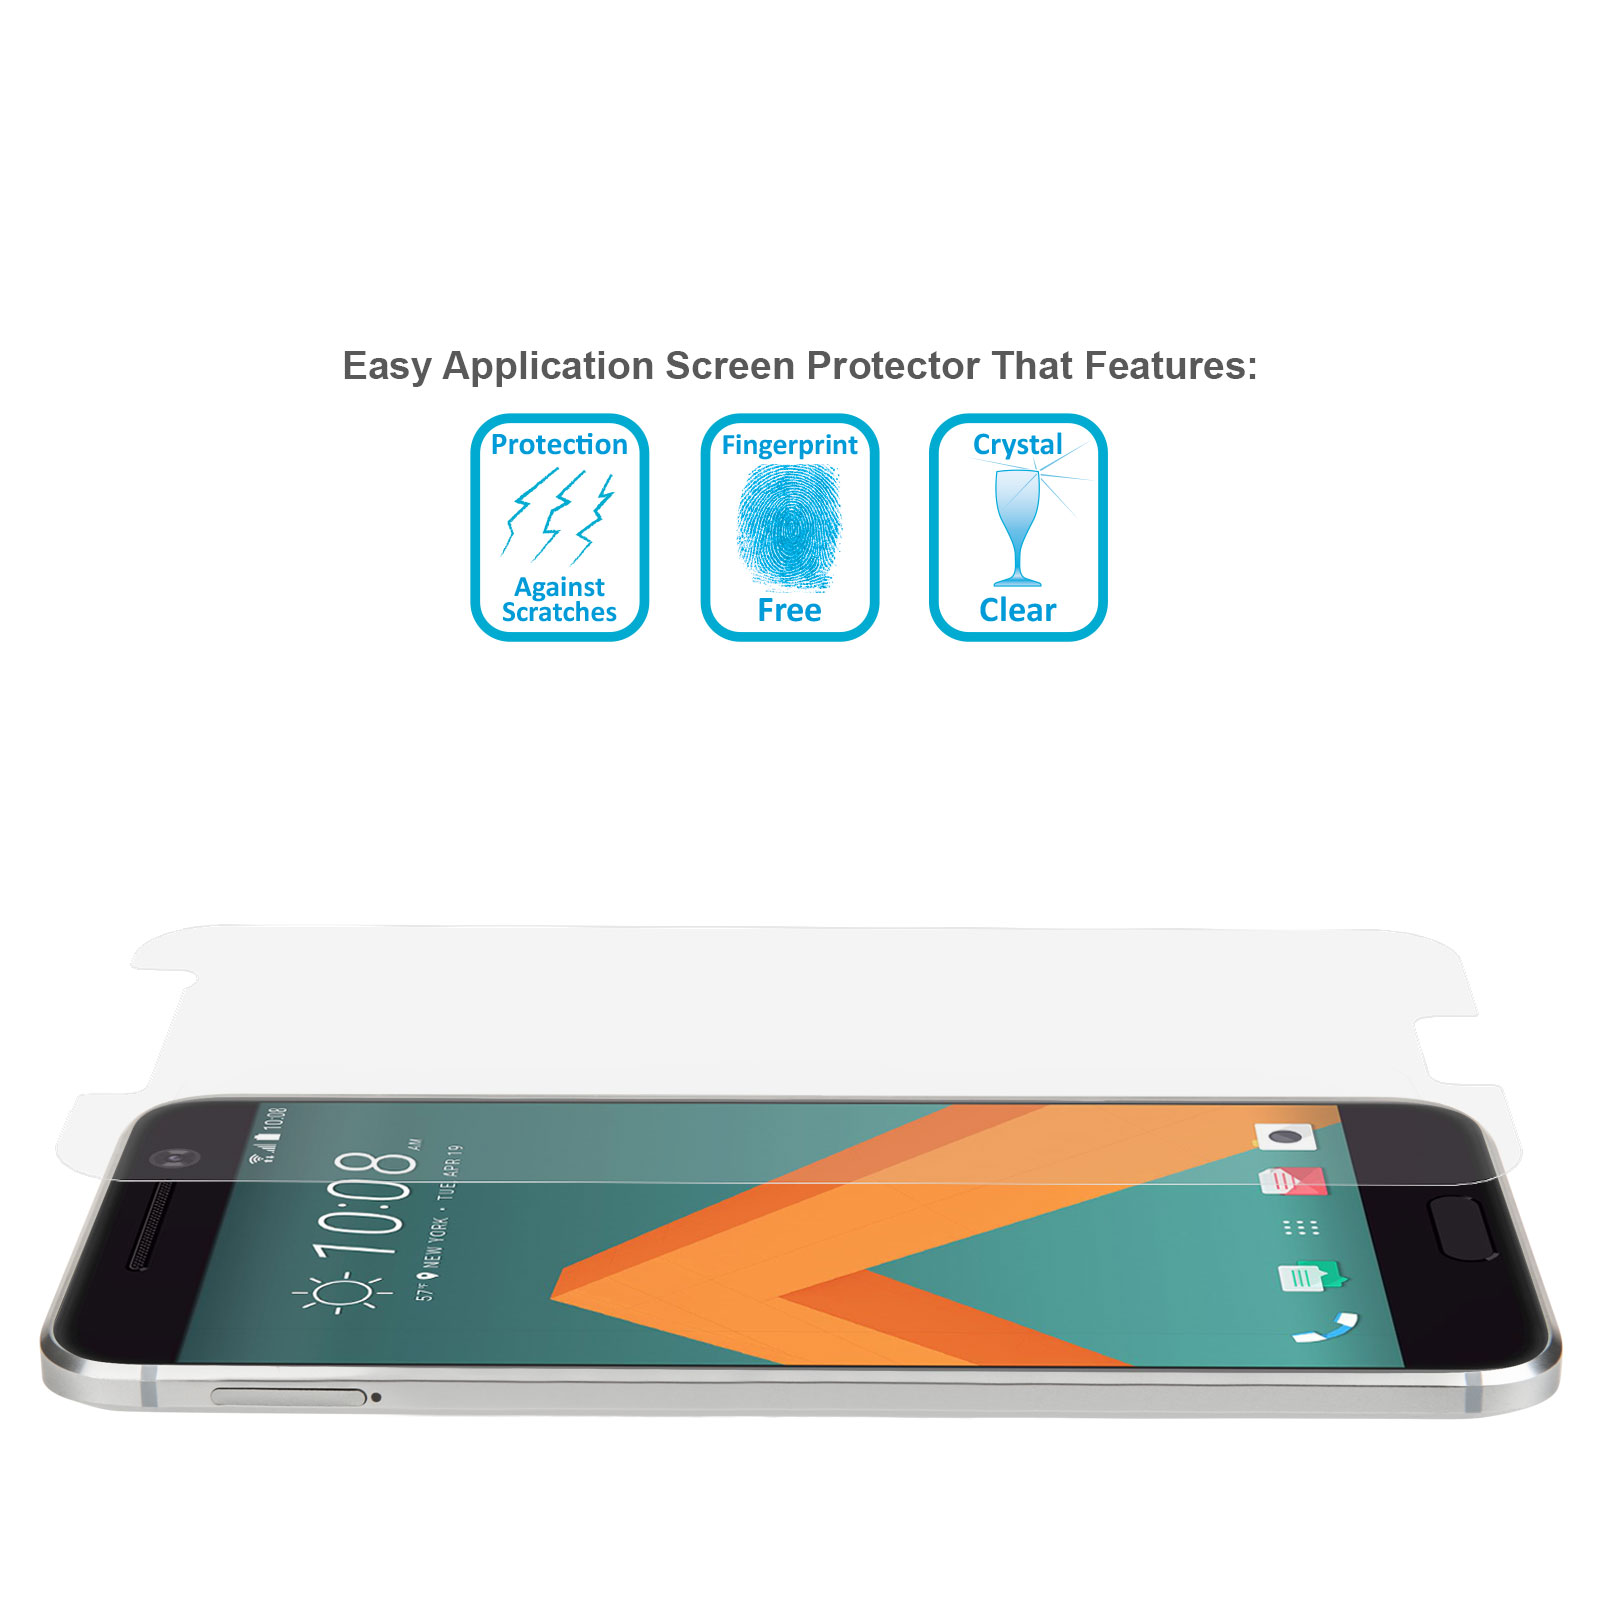 Yousave Accessories HTC 10 Screen Protectors x5